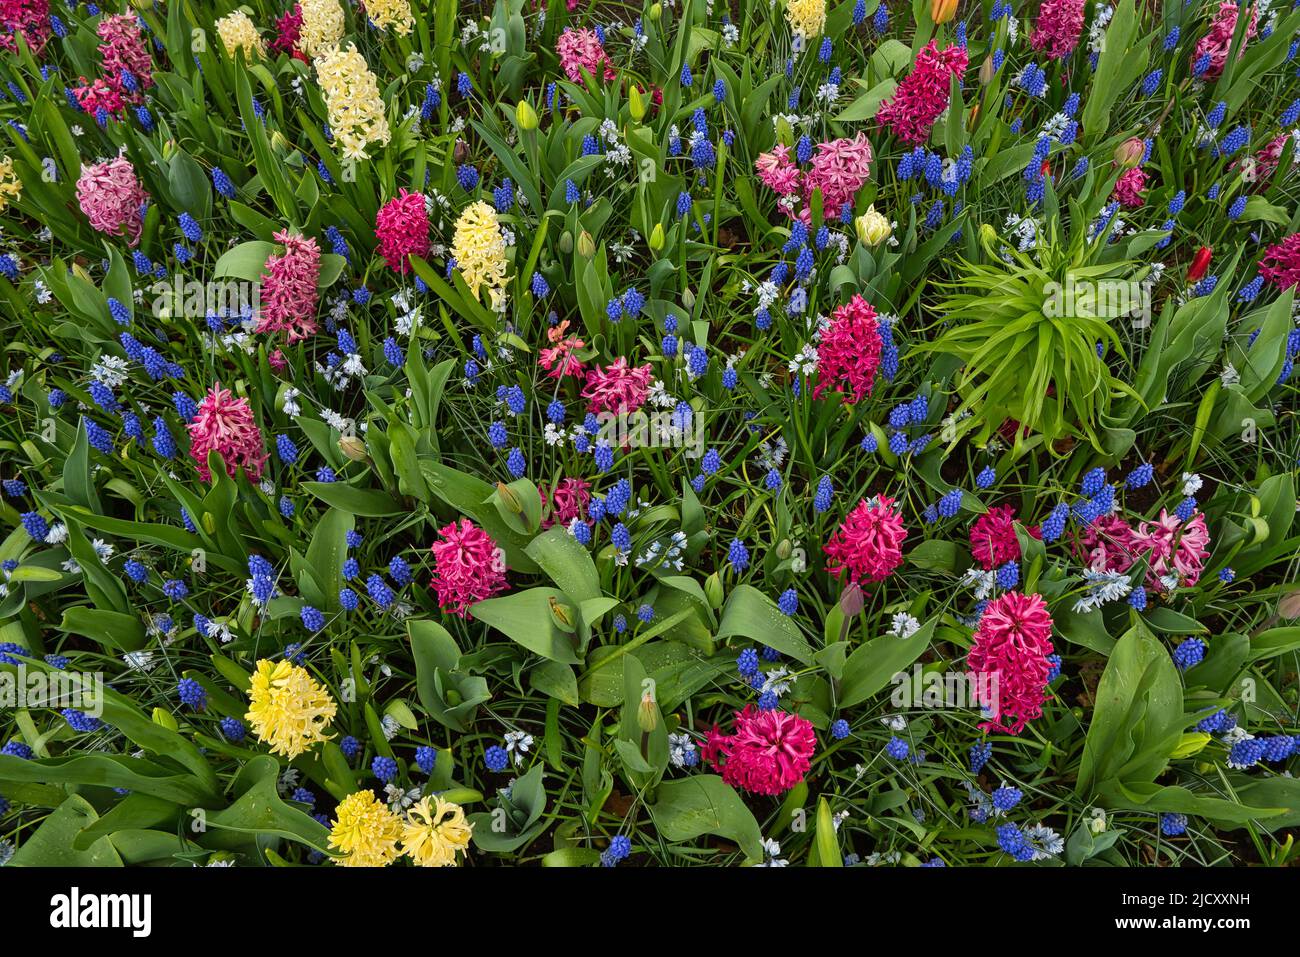 A flower bed with many flowers of different colors Stock Photo